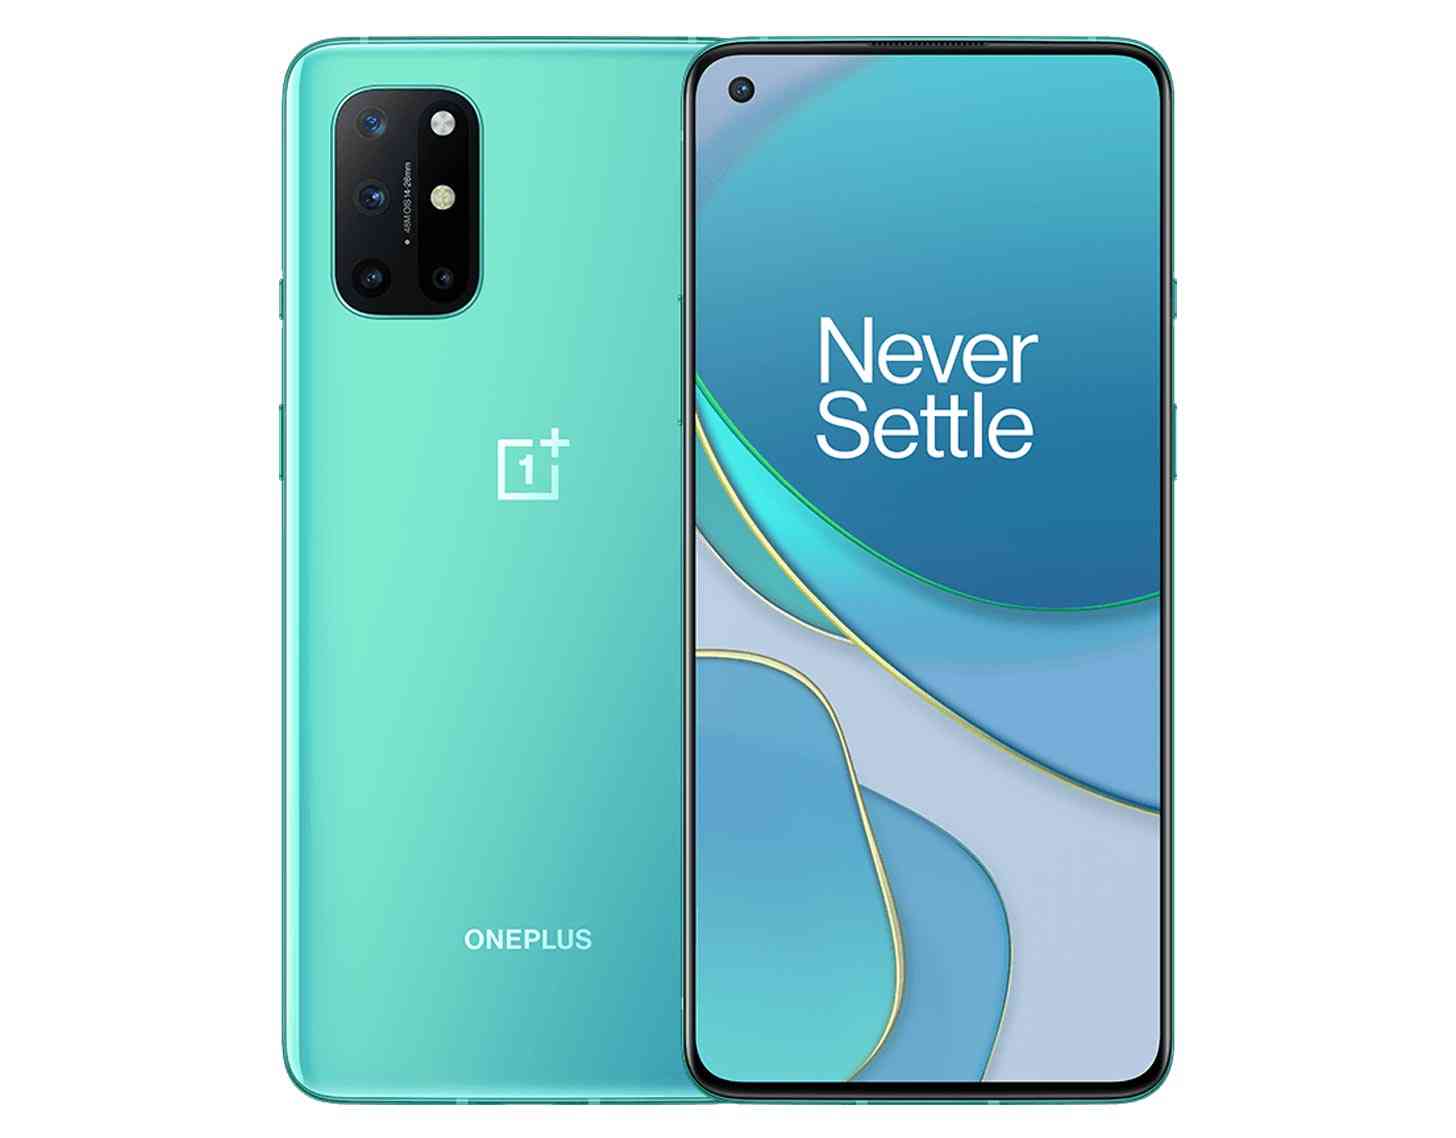 OnePlus 8T+ 5G is a TMobileexclusive version of OnePlus's new phone